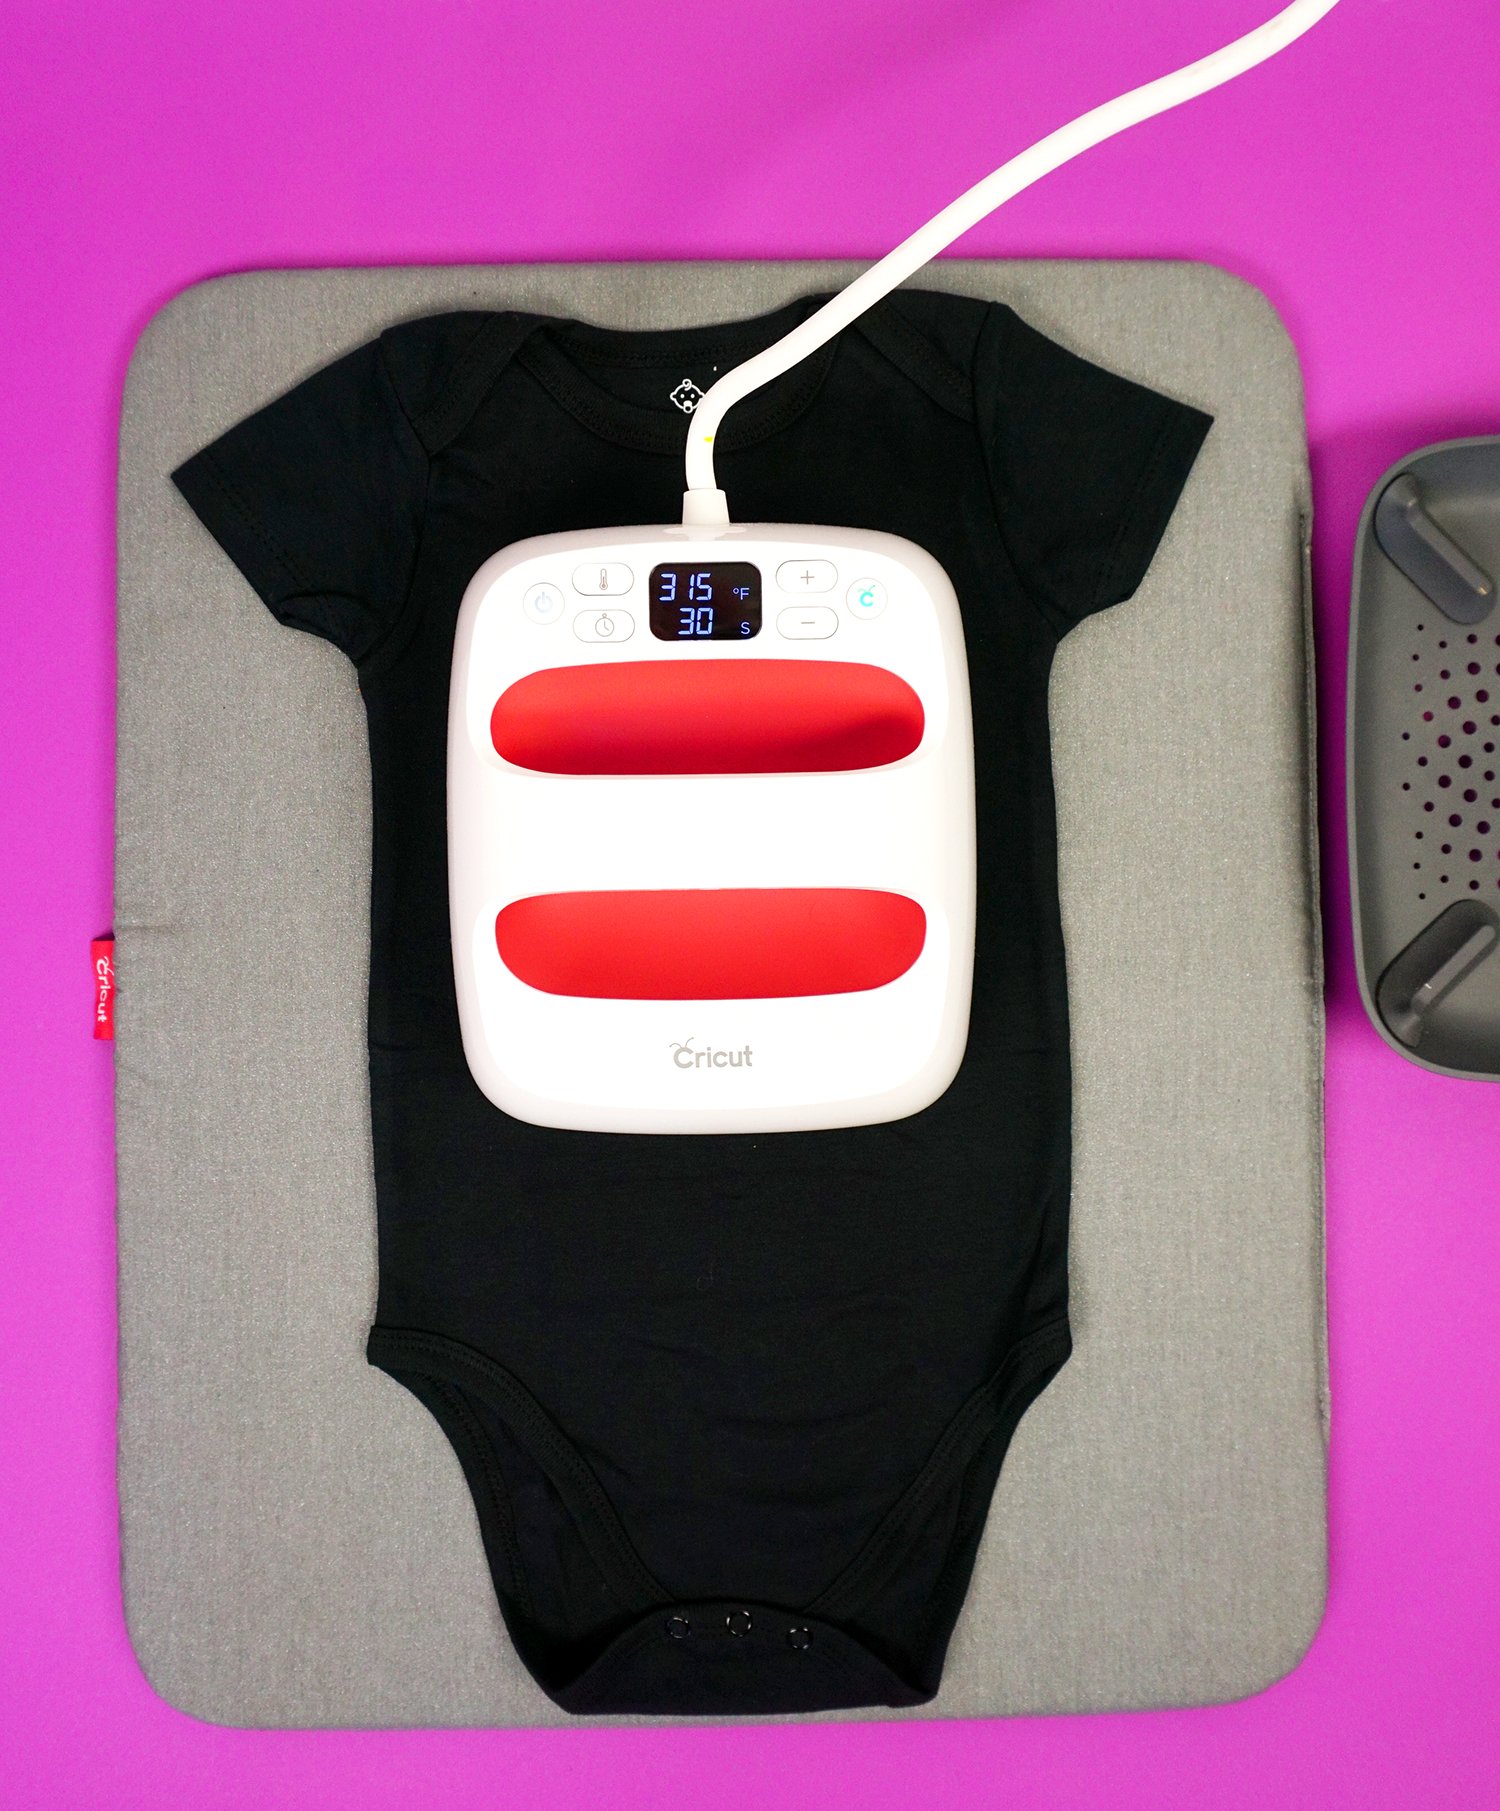 Cricut 6x7 EasyPress 2 on a black baby bodysuit on EasyPress mat and purple background